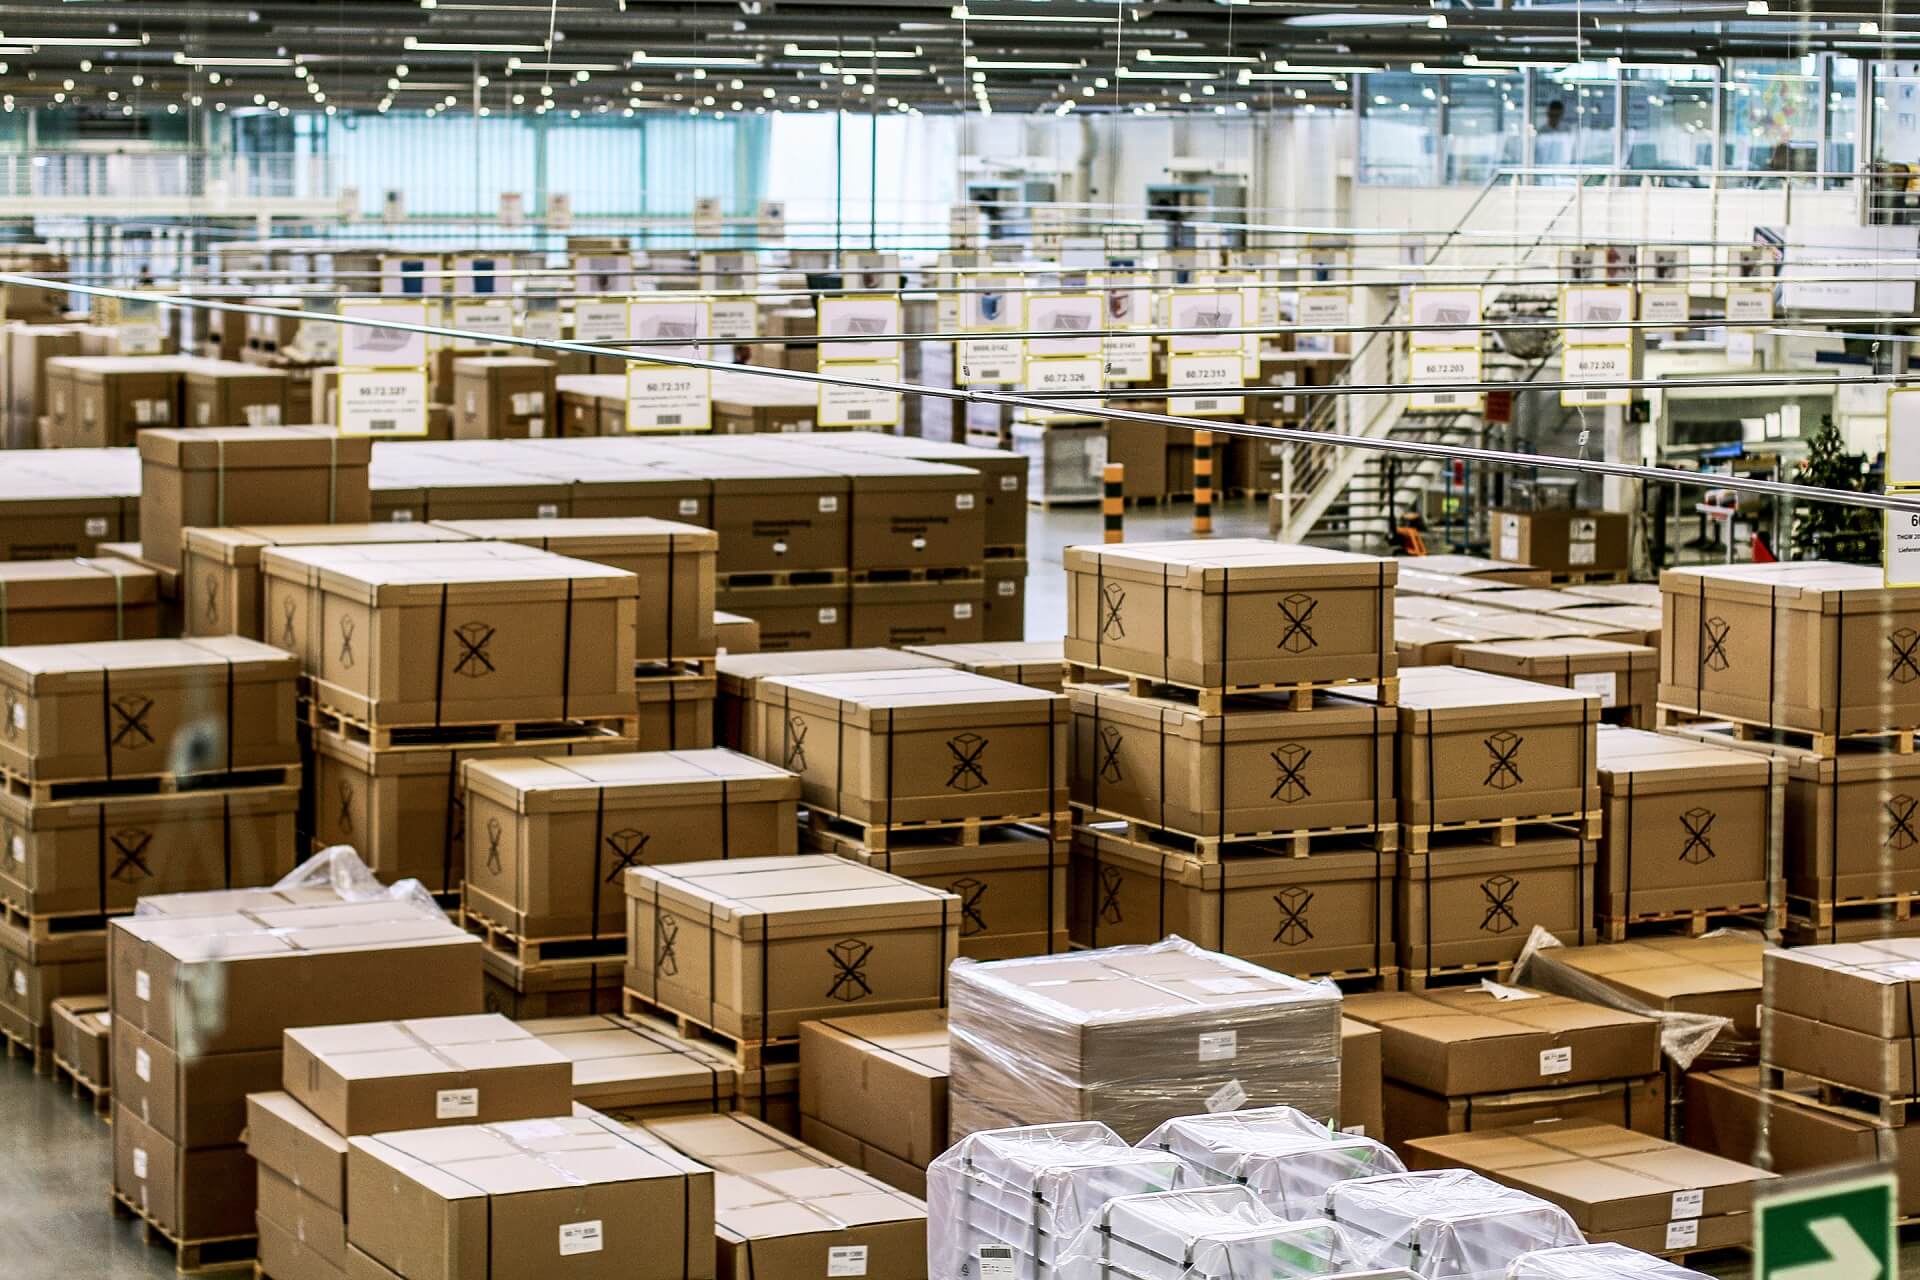 Packages pile up in shipping hall due to lacks of delivery capability for components 